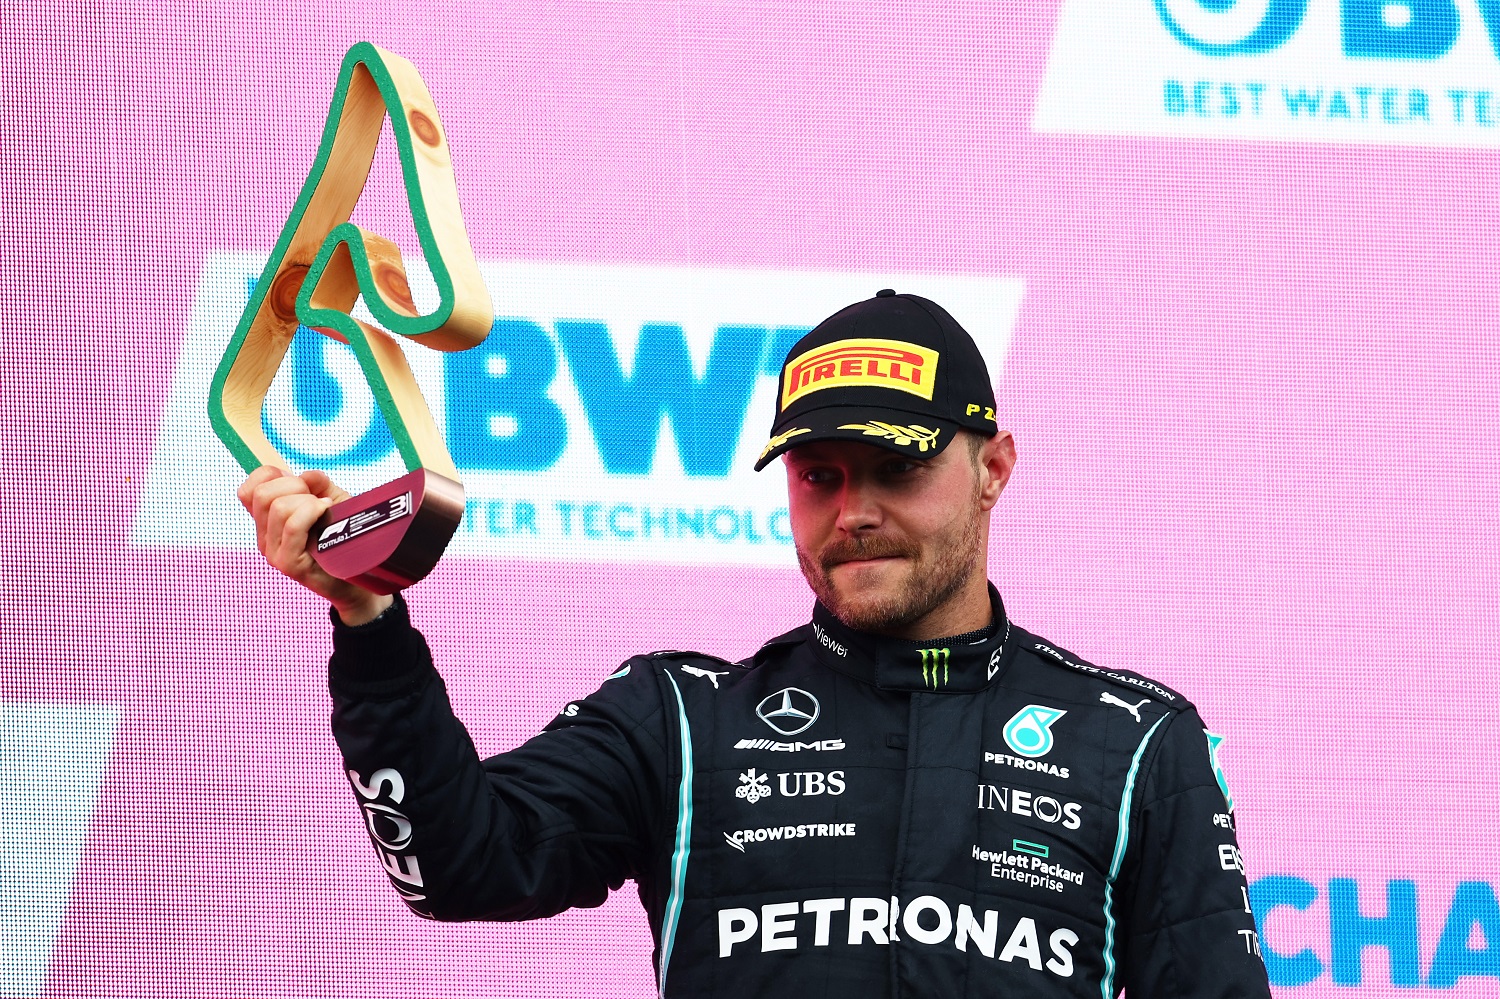 Valtteri Bottas of Mercedes celebrates on the podium after the Formula 1 Grand Prix of Styria at Red Bull Ring on June 27, 2021, in Spielberg, Austria.